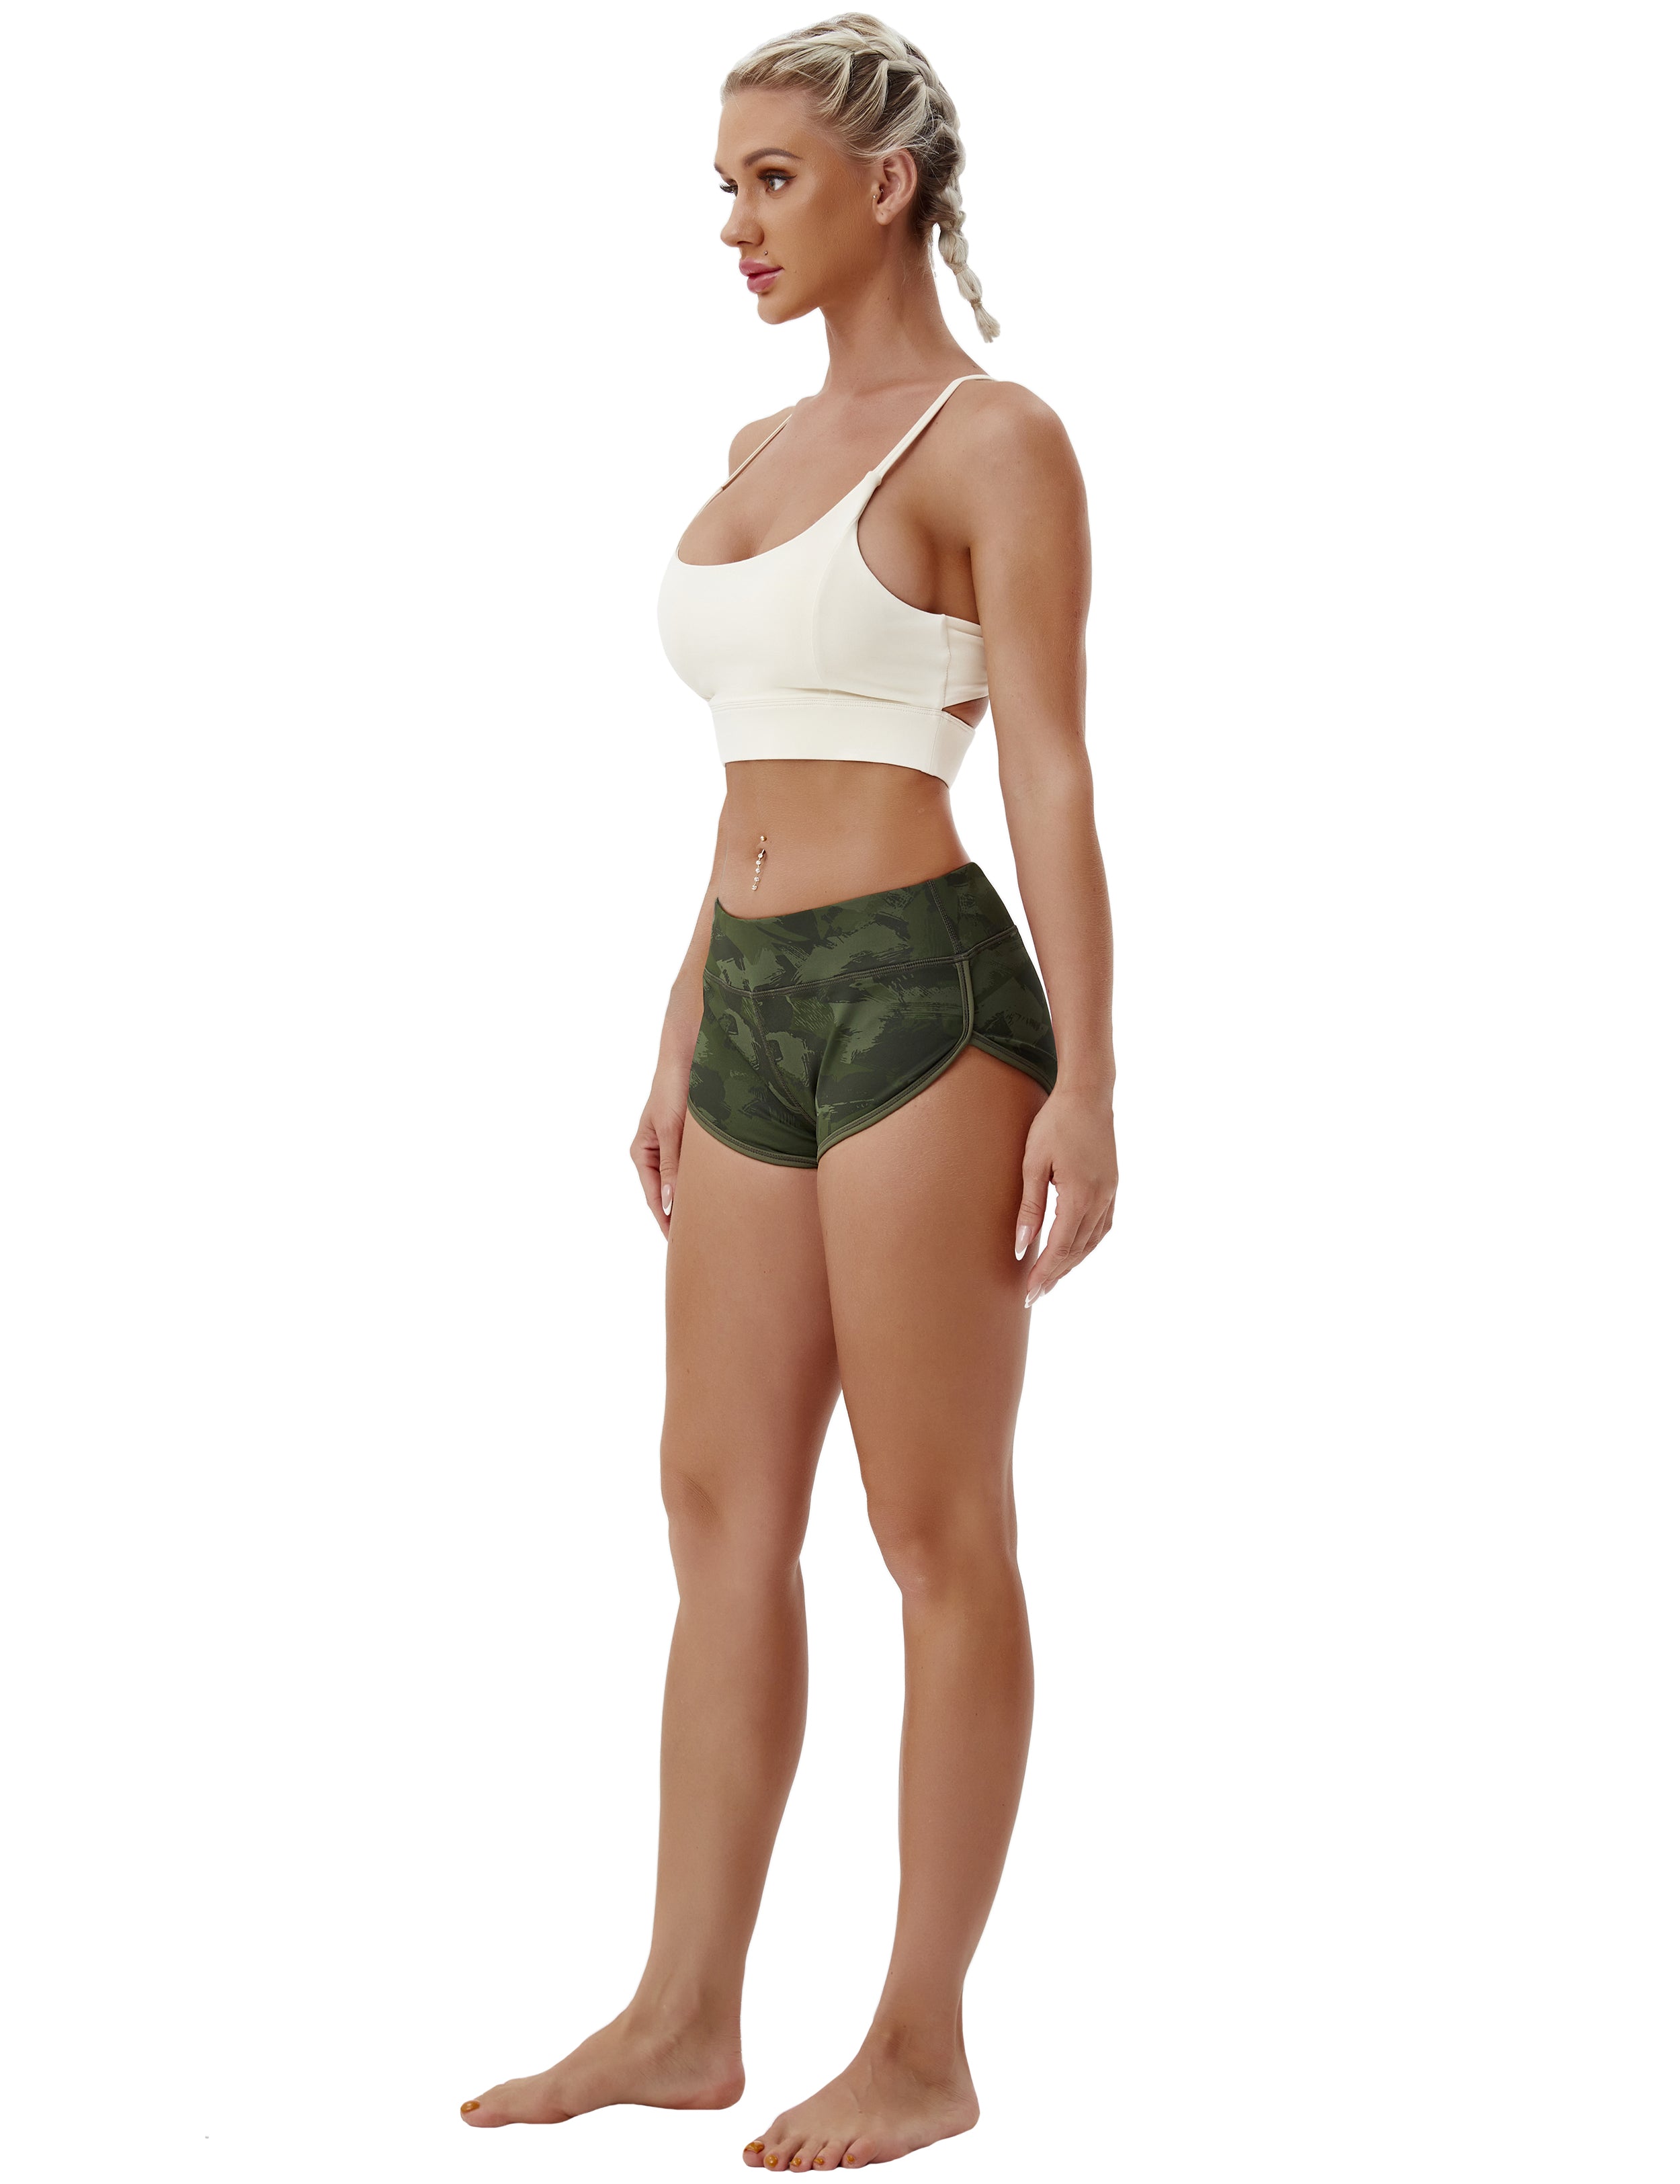 Printed Booty Golf Shorts green brushcamo Sleek, soft, smooth and totally comfortable: our newest sexy style is here. Softest-ever fabric High elasticity High density 4-way stretch Fabric doesn't attract lint easily No see-through Moisture-wicking Machine wash 78% Polyester, 22% Spandex